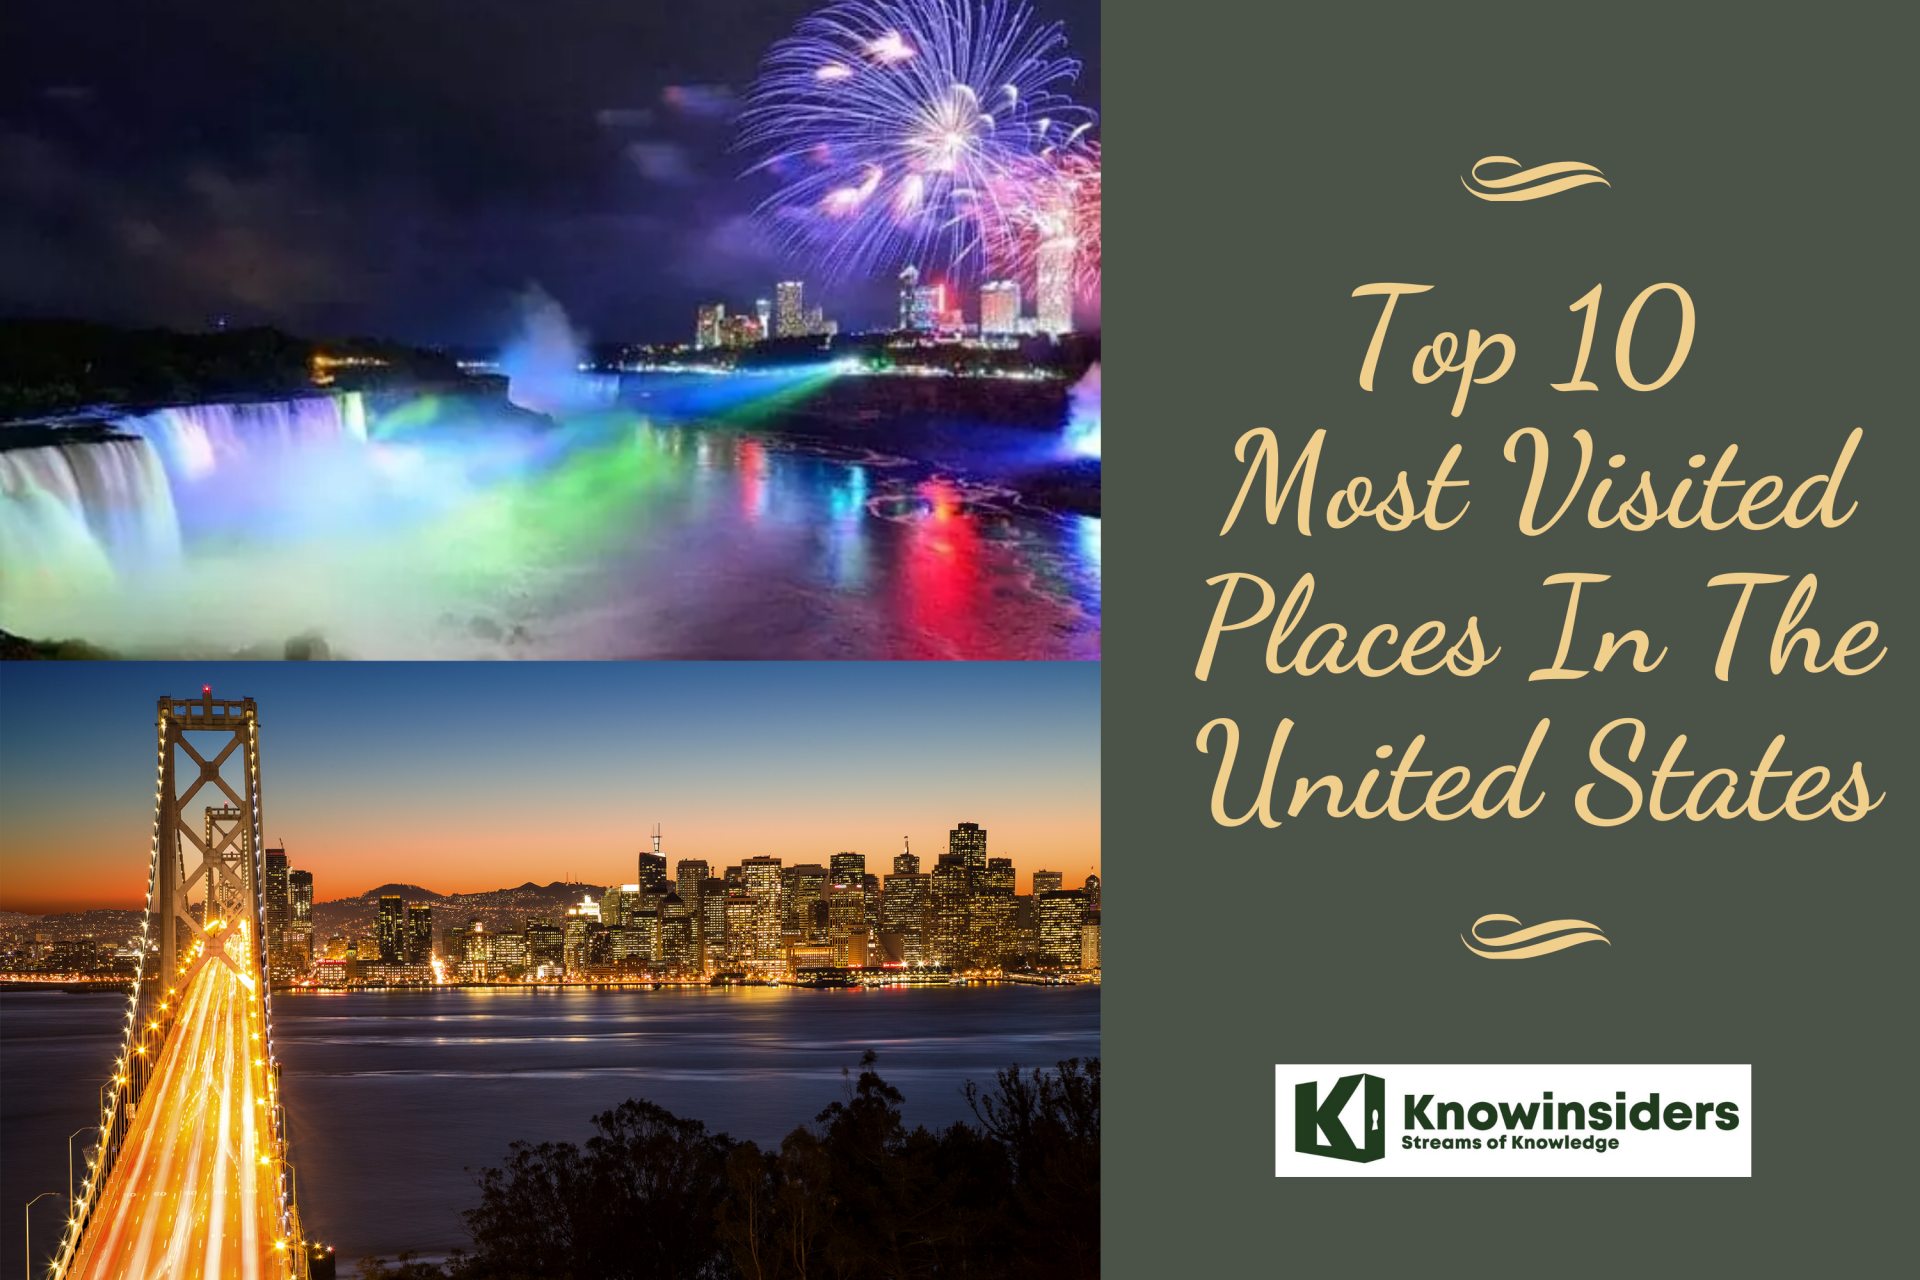 Top 10 Most Visited Places In The United States